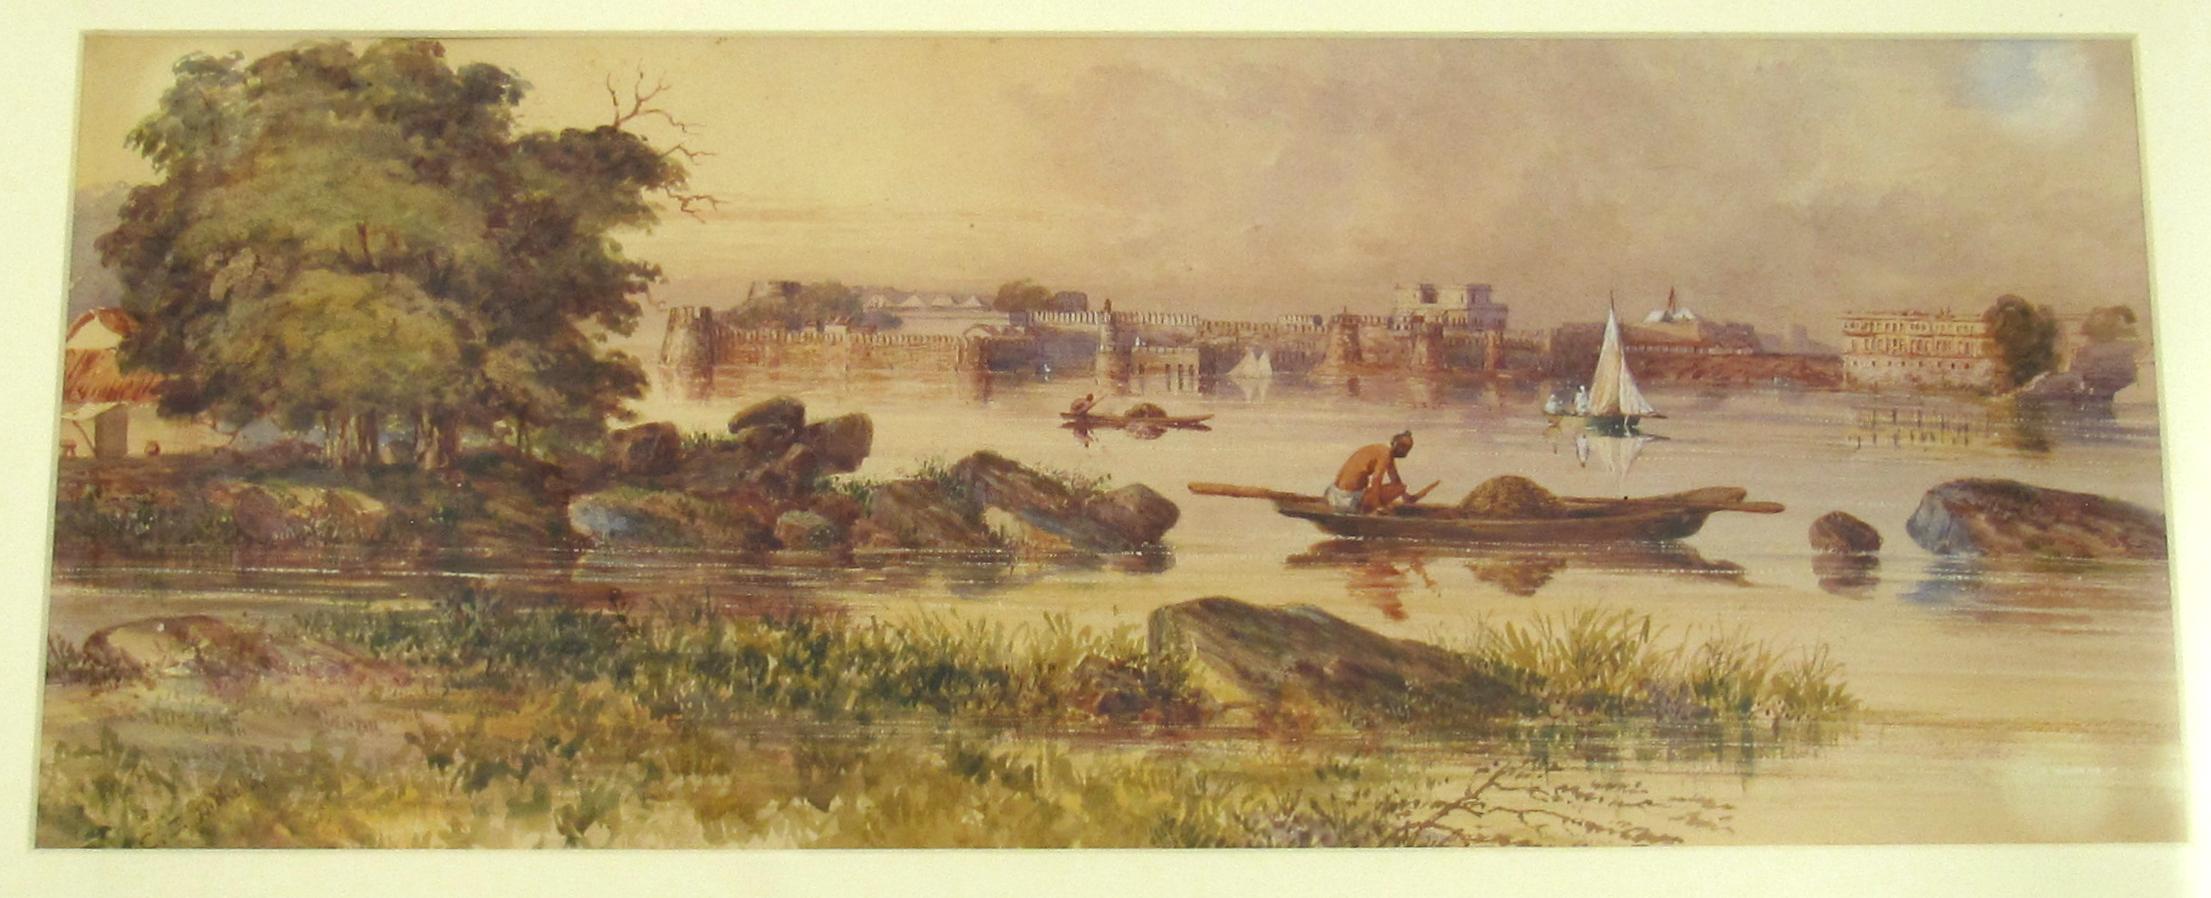 Charles George Nicholls
(English, flourished 1792 - 1818)

Picturesque Gangetic Landscape in India

• Circa 1805
• Watercolour on thick paper, ca. 20 x 49.5 cm
• Mounted behind a modern passpartout, visible image ca. 19 x 49 cm
• Original Georgian